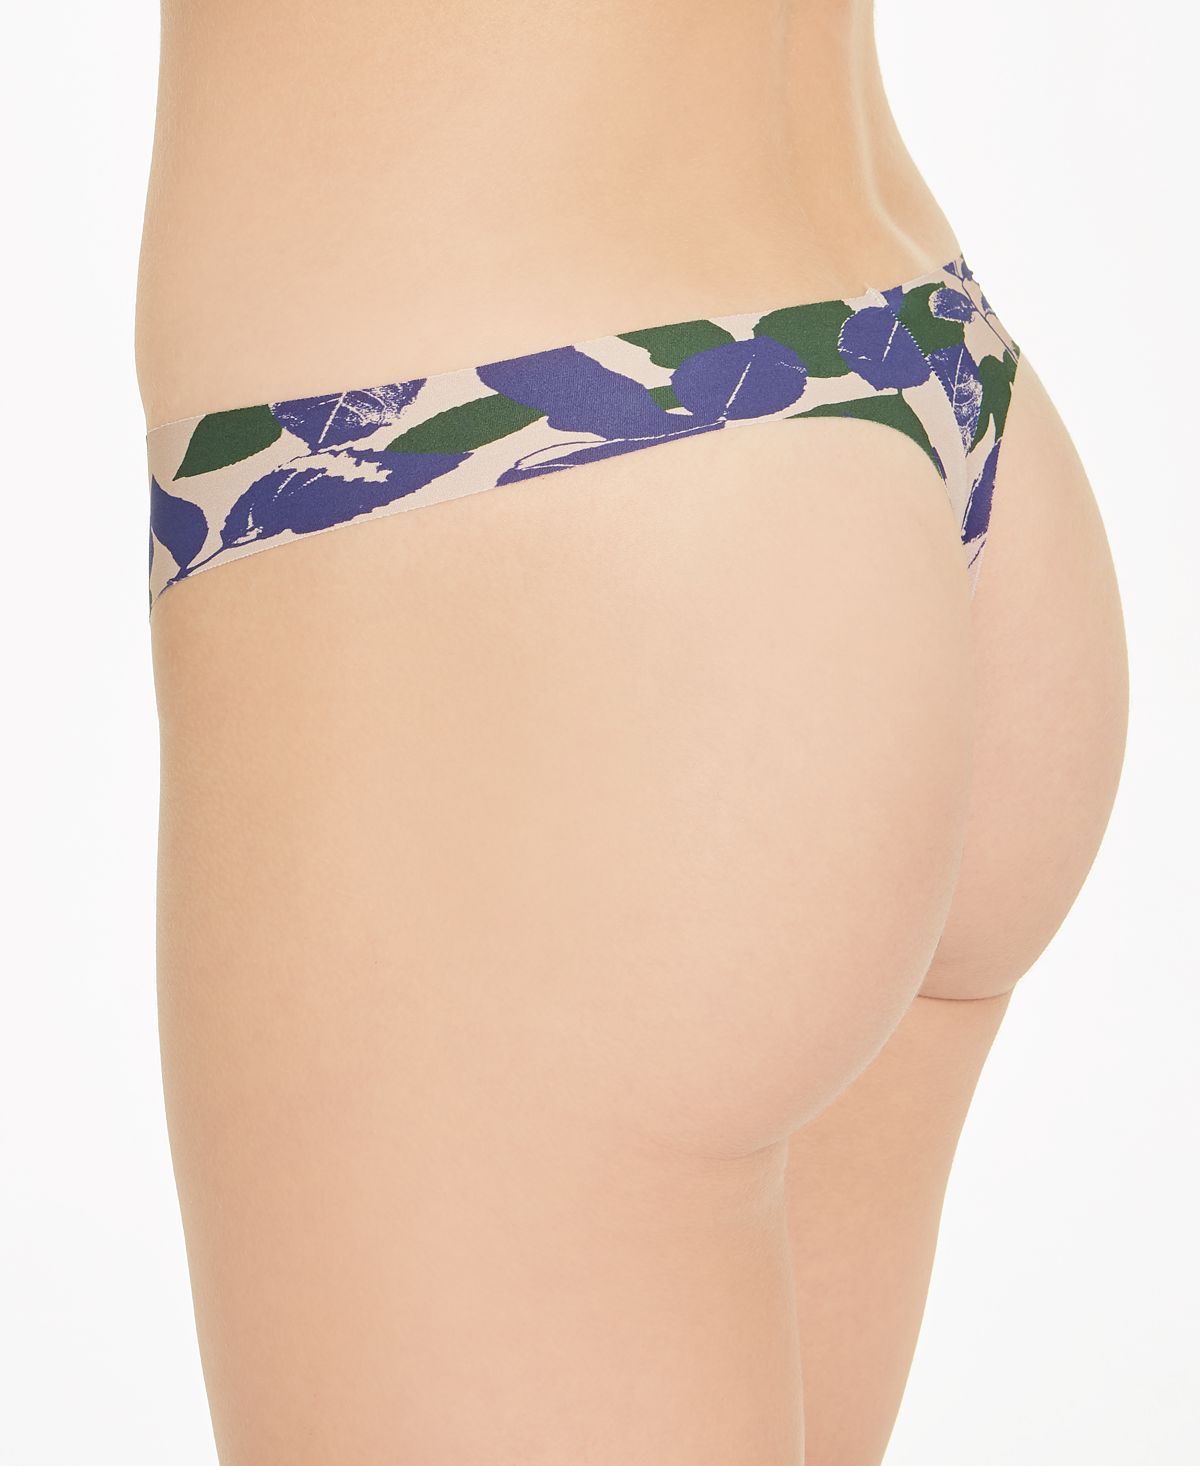 Calvin Klein Wo Invisibles Thong Underwear D3428 July Floral